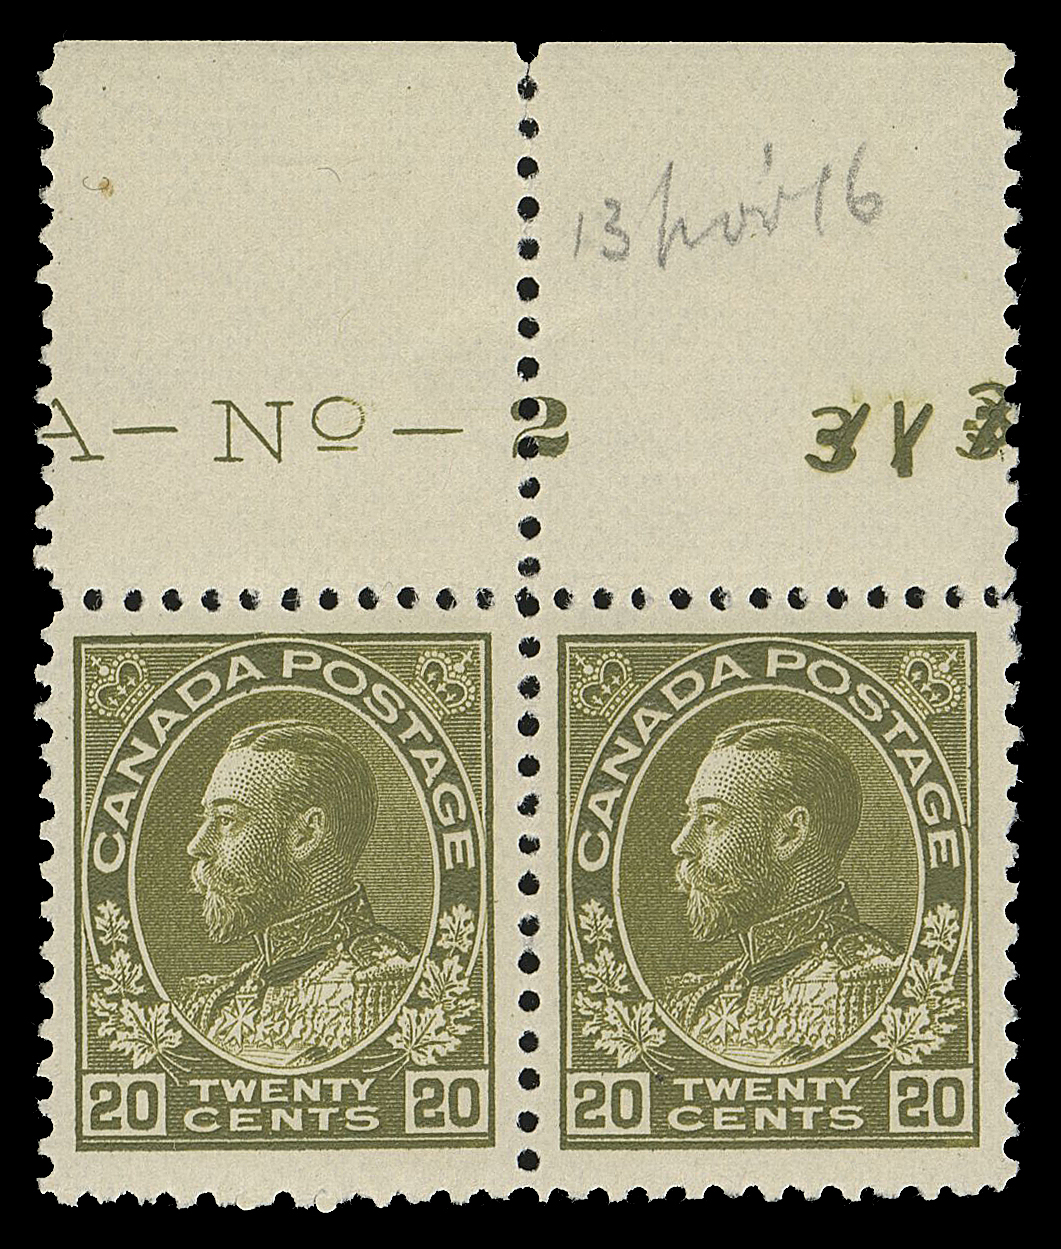 ADMIRAL STAMPS  119c,A selected mint pair showing large portion of imprint "A - No. 2" with printing order number "313" punched out, nicely centered with large margins, LH in selvedge, both stamps VF NH; penciled "13 Nov 